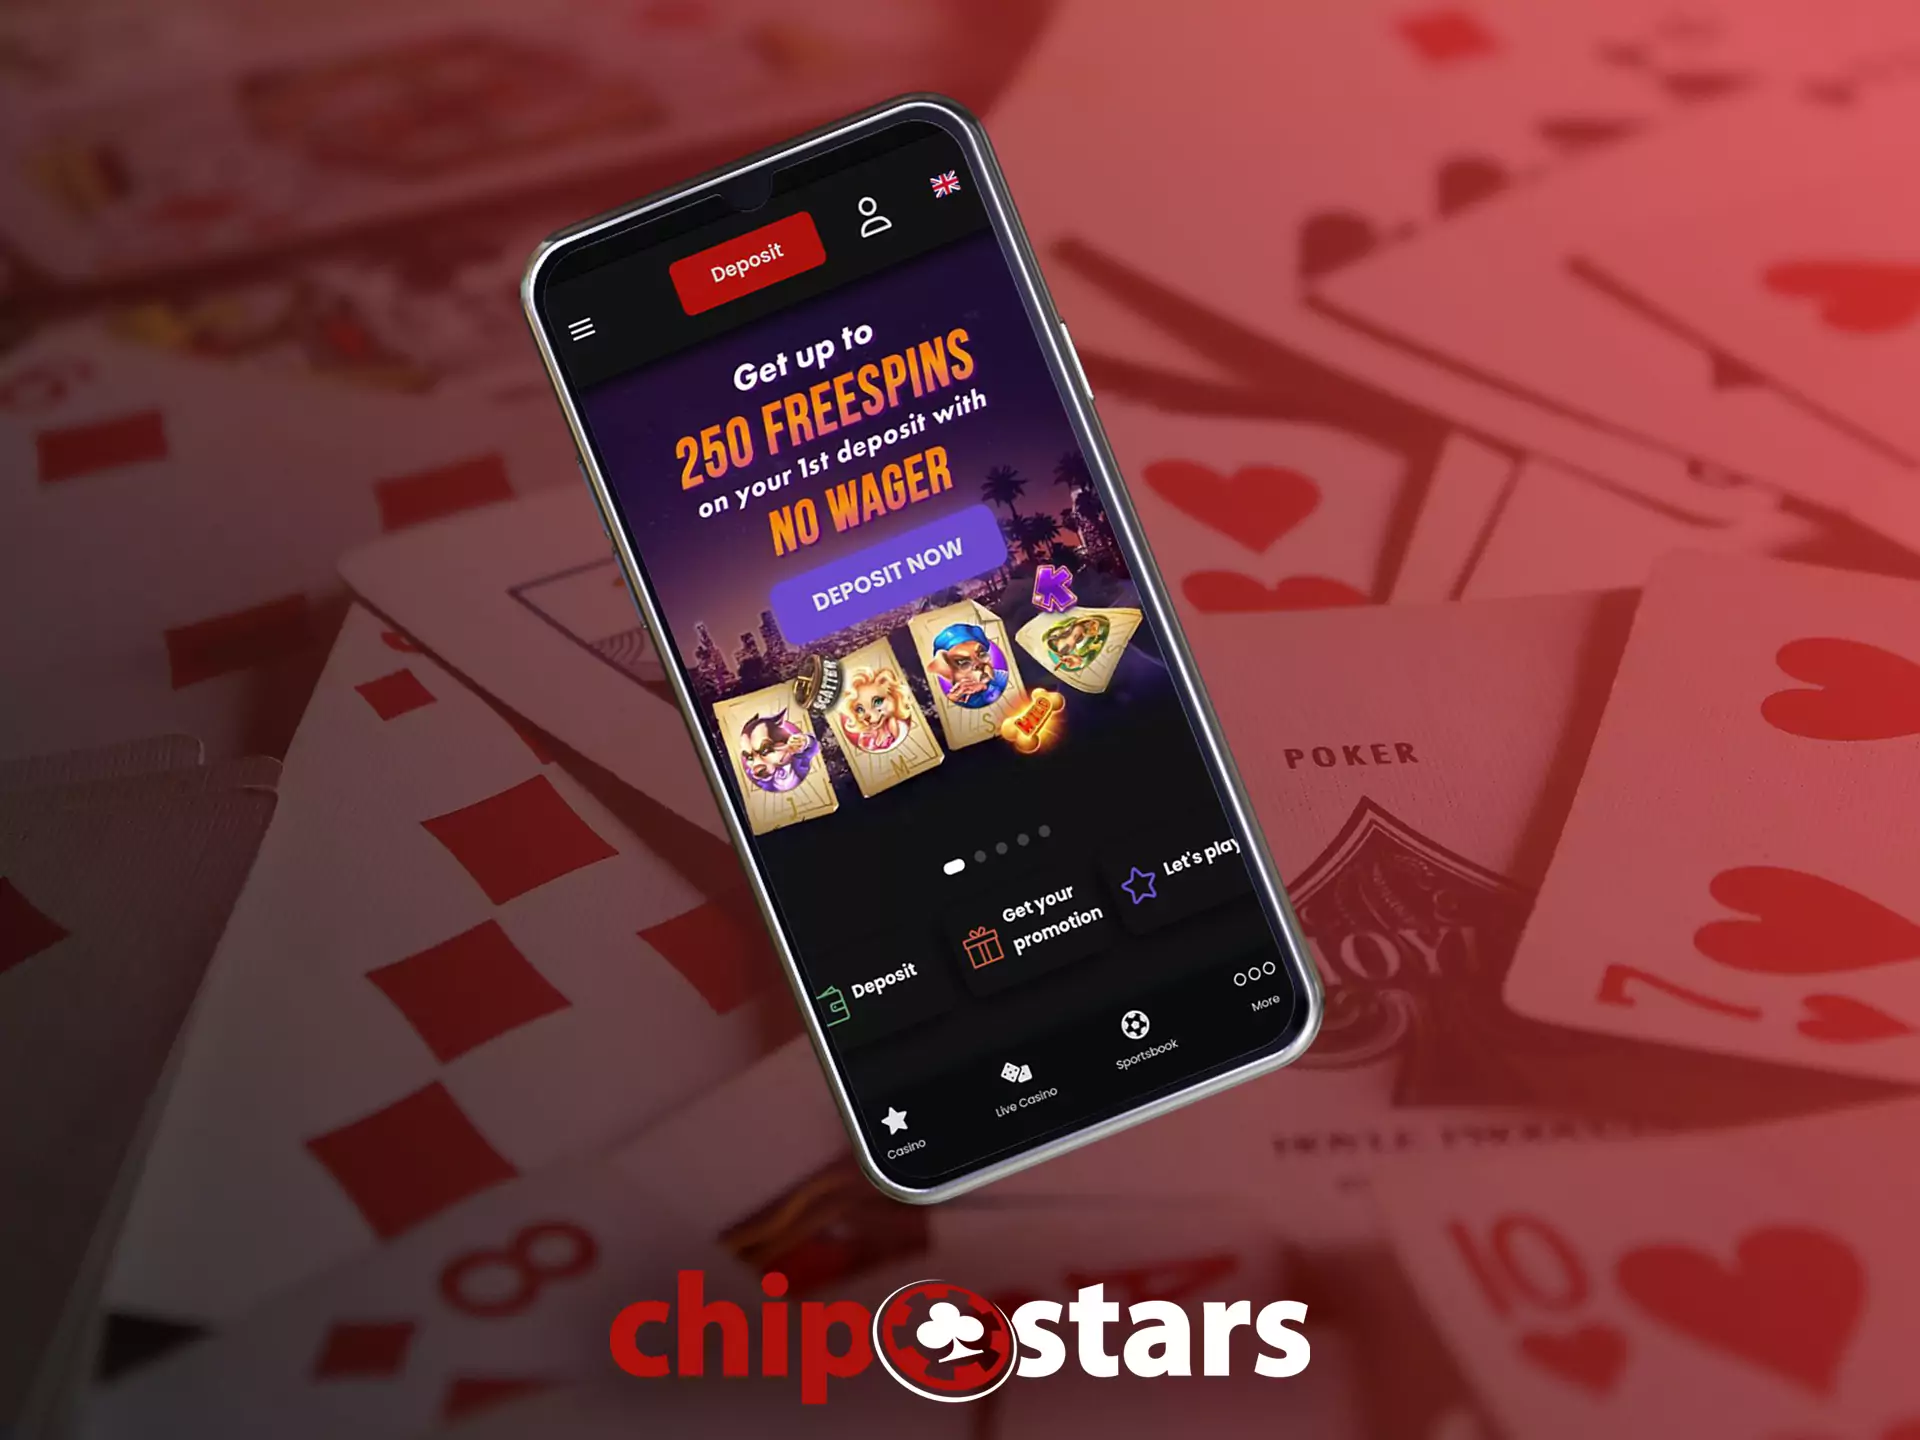 Since Chipstars doesn't have an app yet, you should use the mobile site on your smartphone.